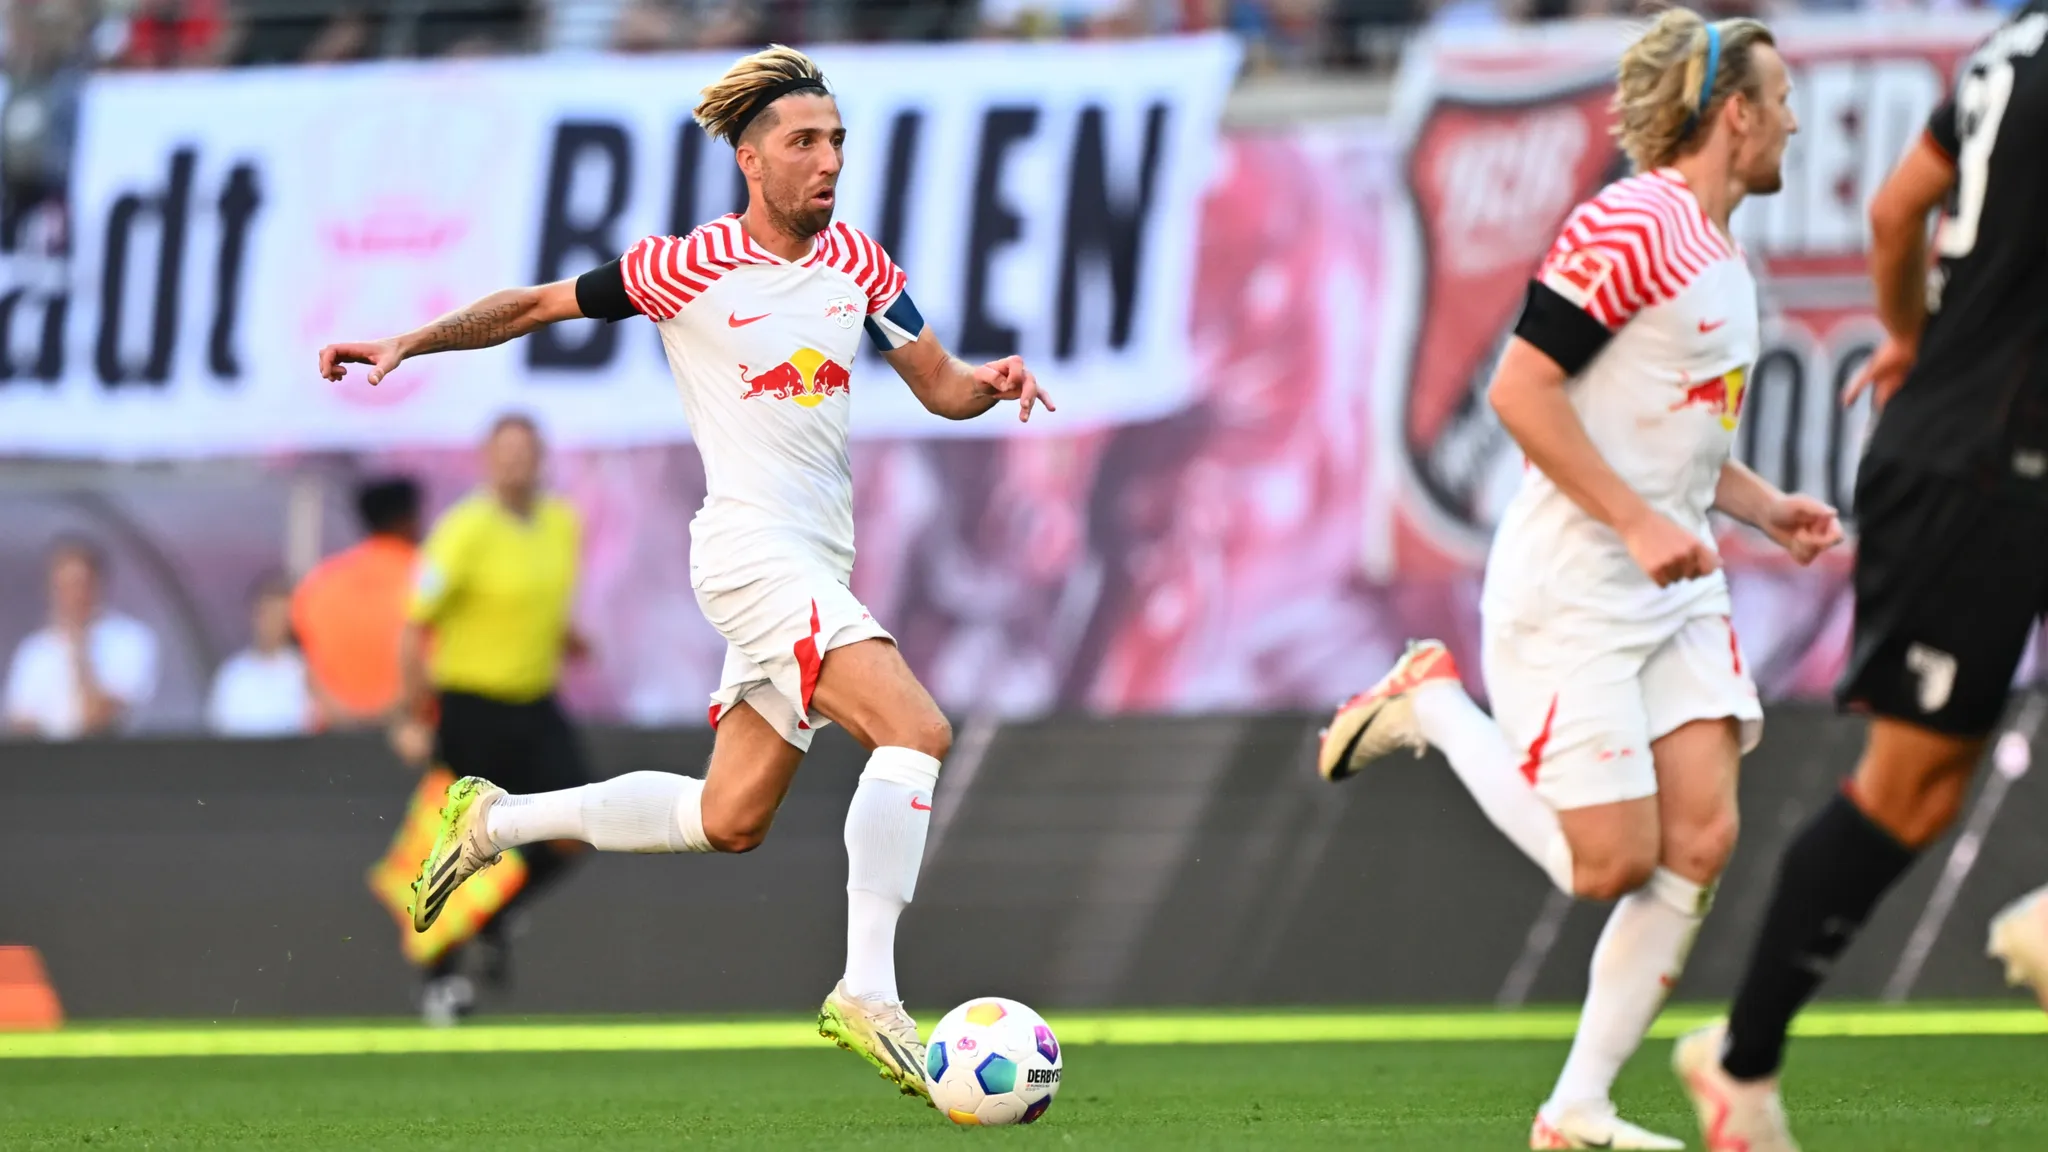 Kevin Kampl on the attack.